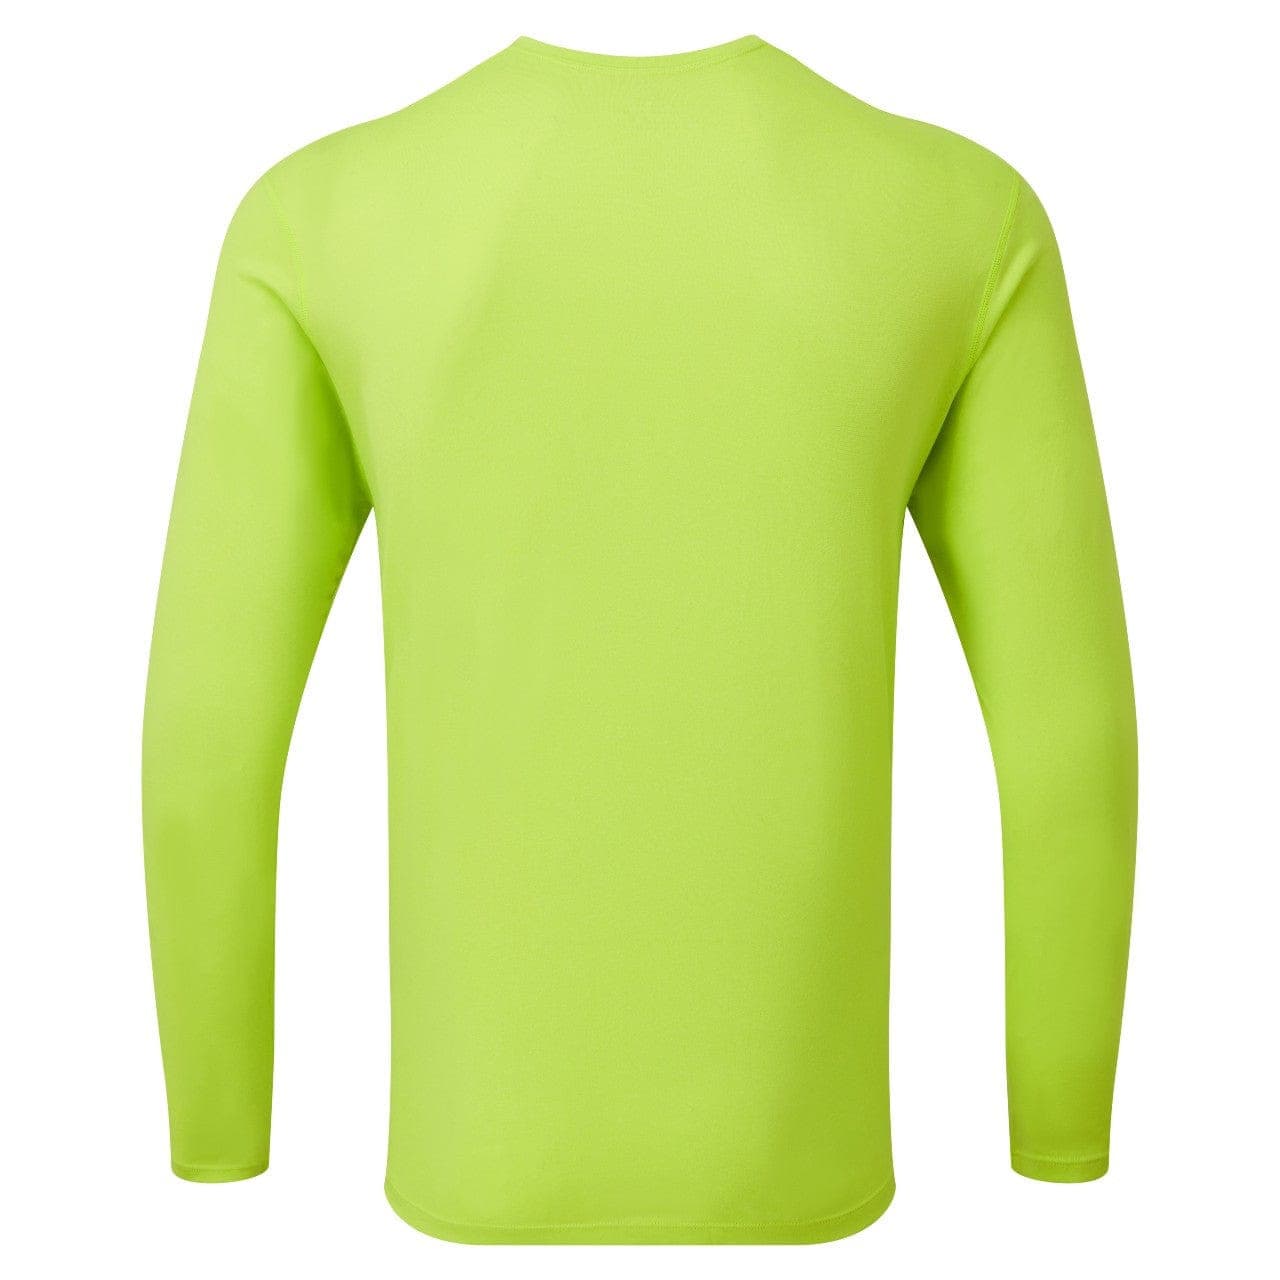 Ronhill Core L/S Tee  (Mens) - AcidLime/PrussianBlue